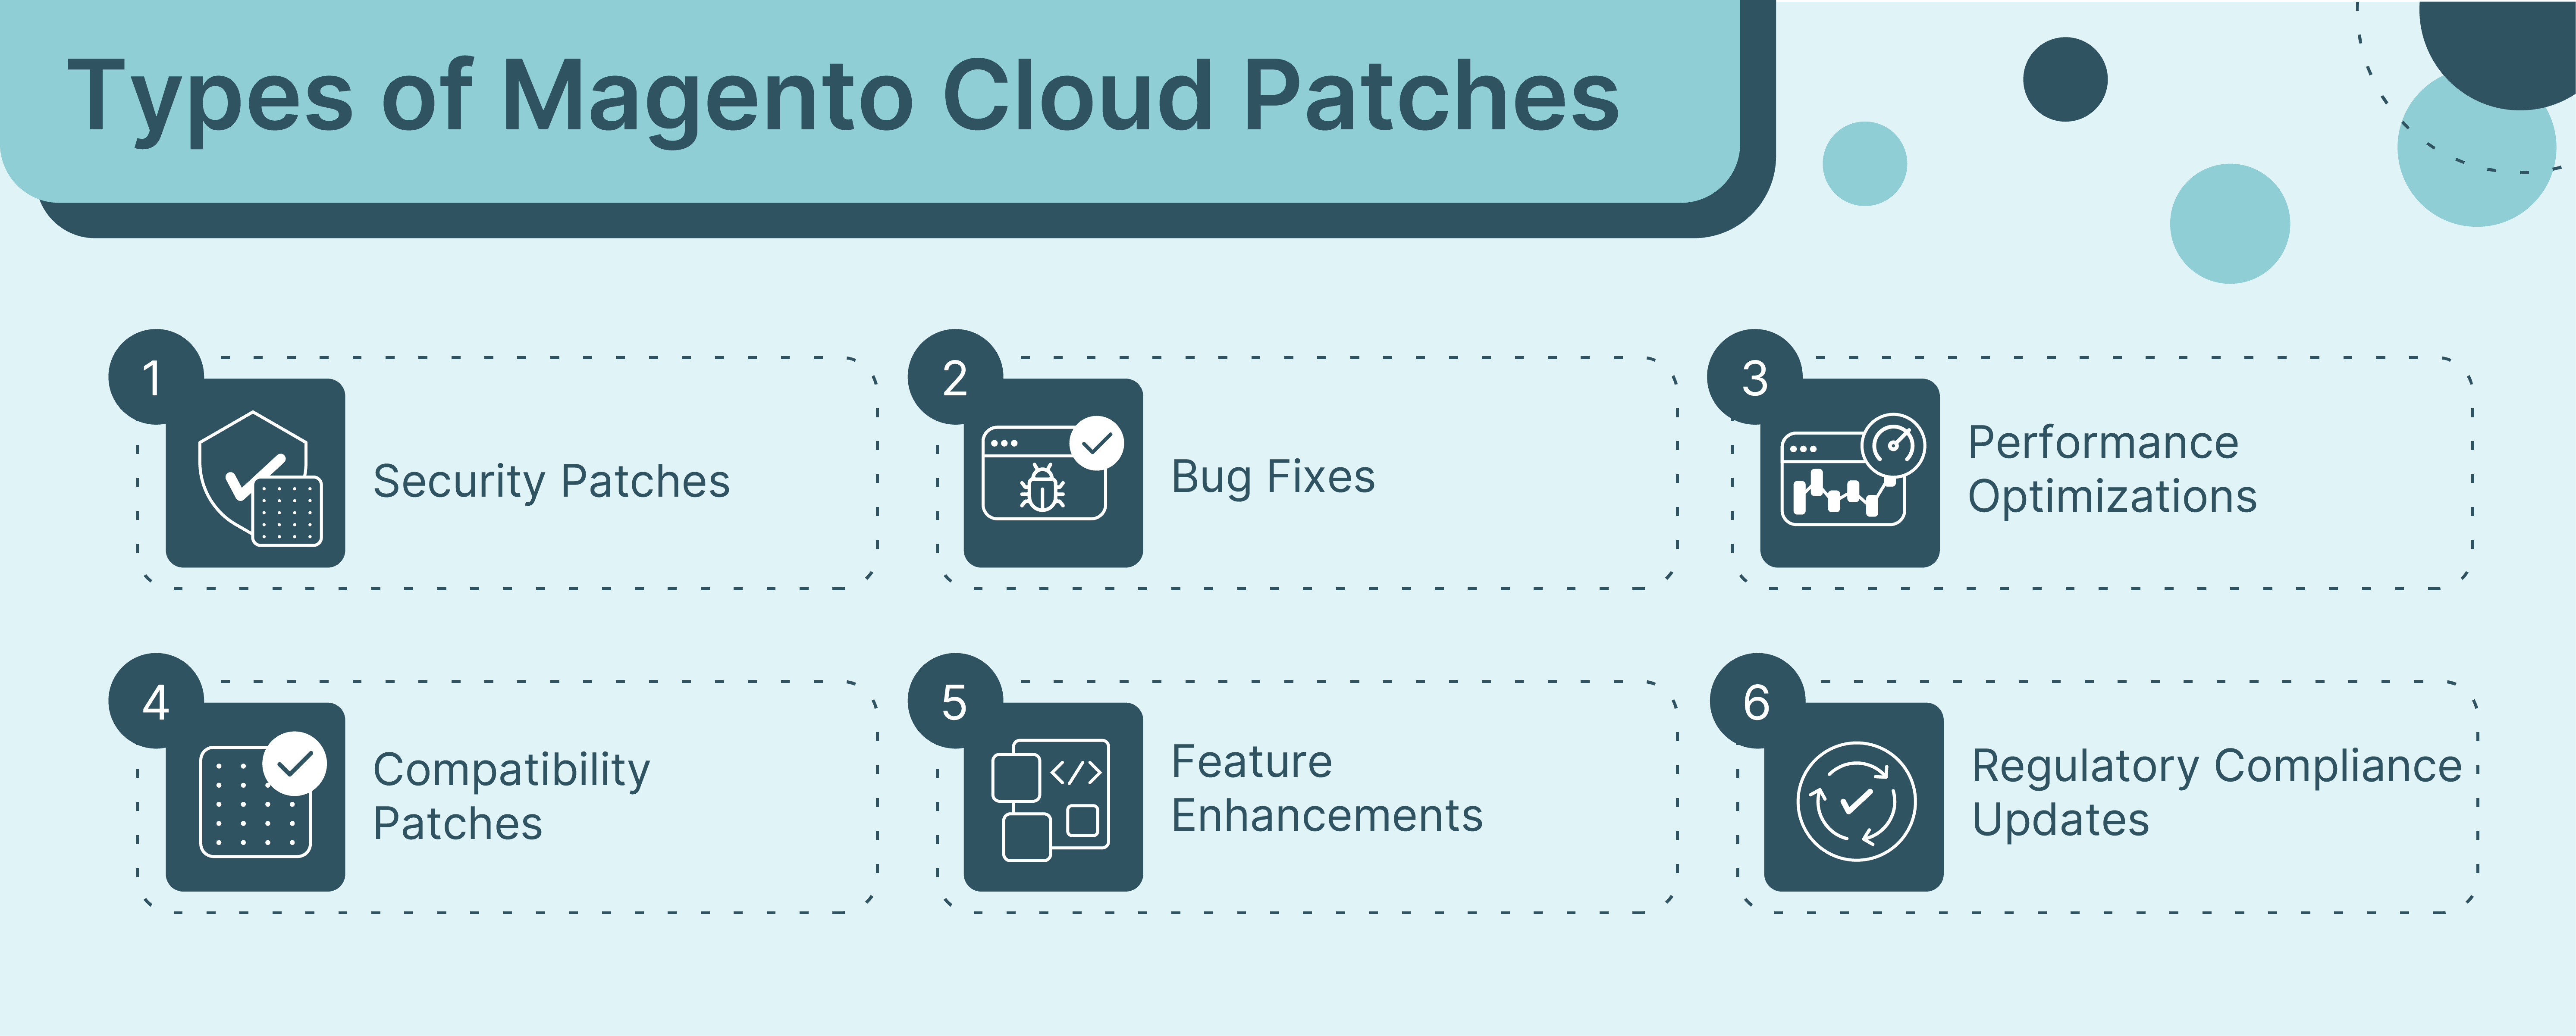 6 Types of Magento Cloud Patches